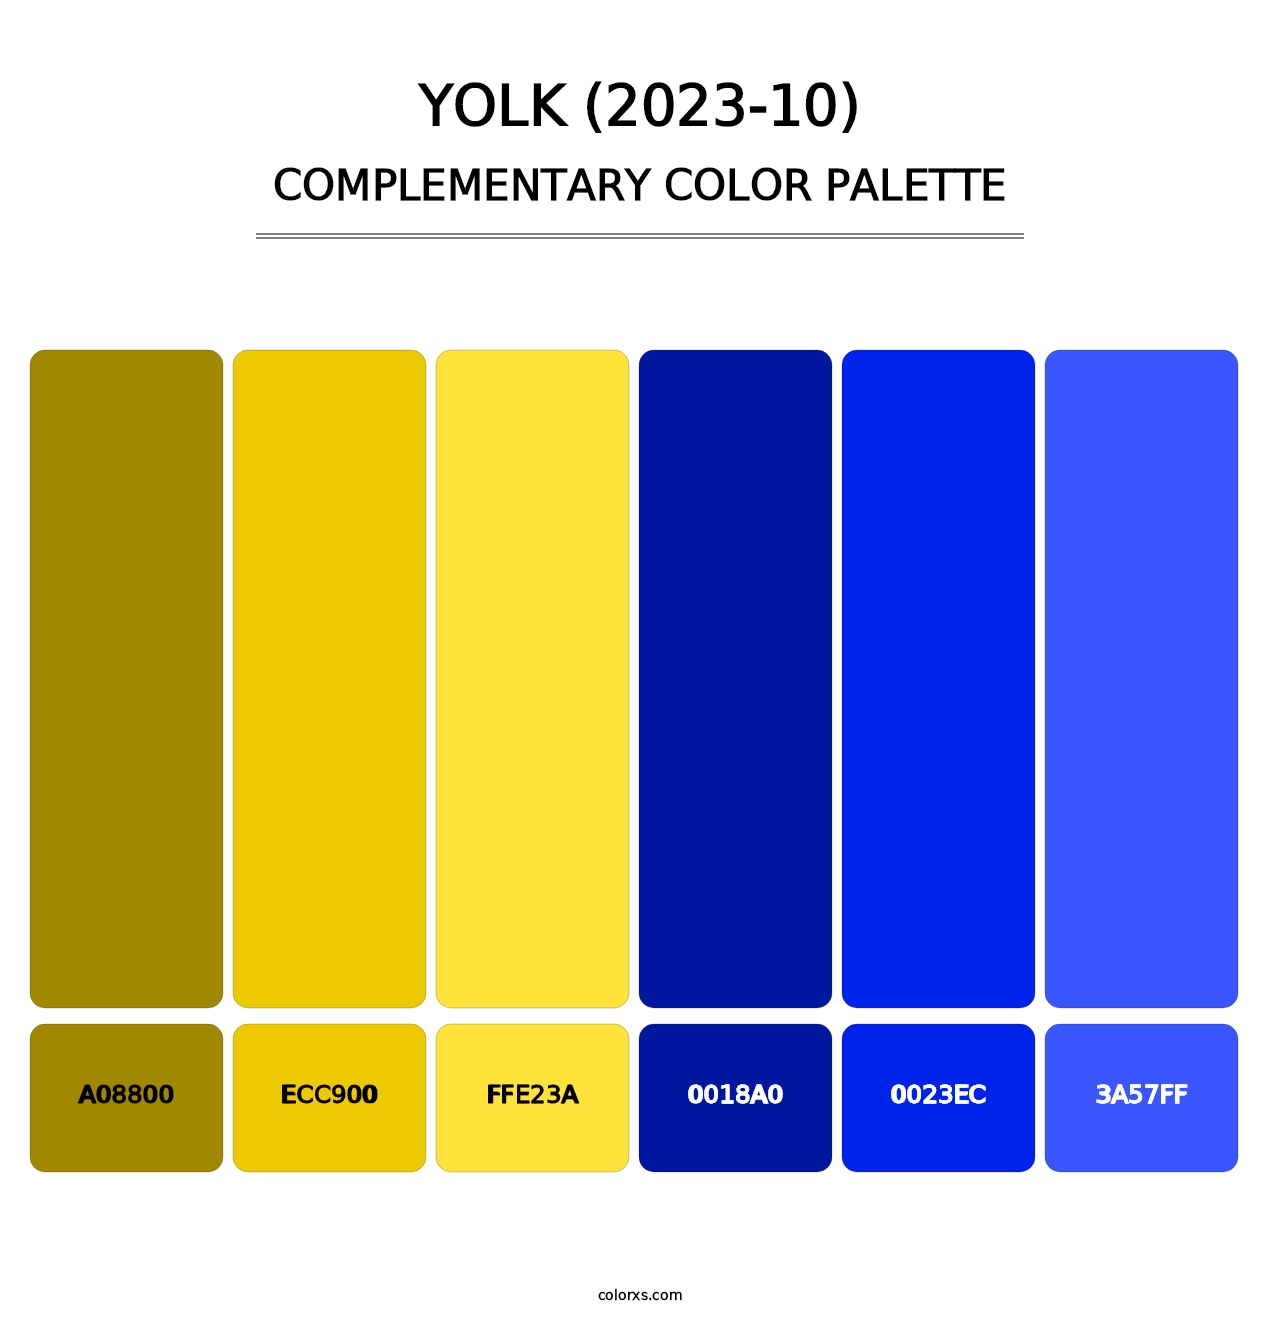 Yolk (2023-10) - Complementary Color Palette